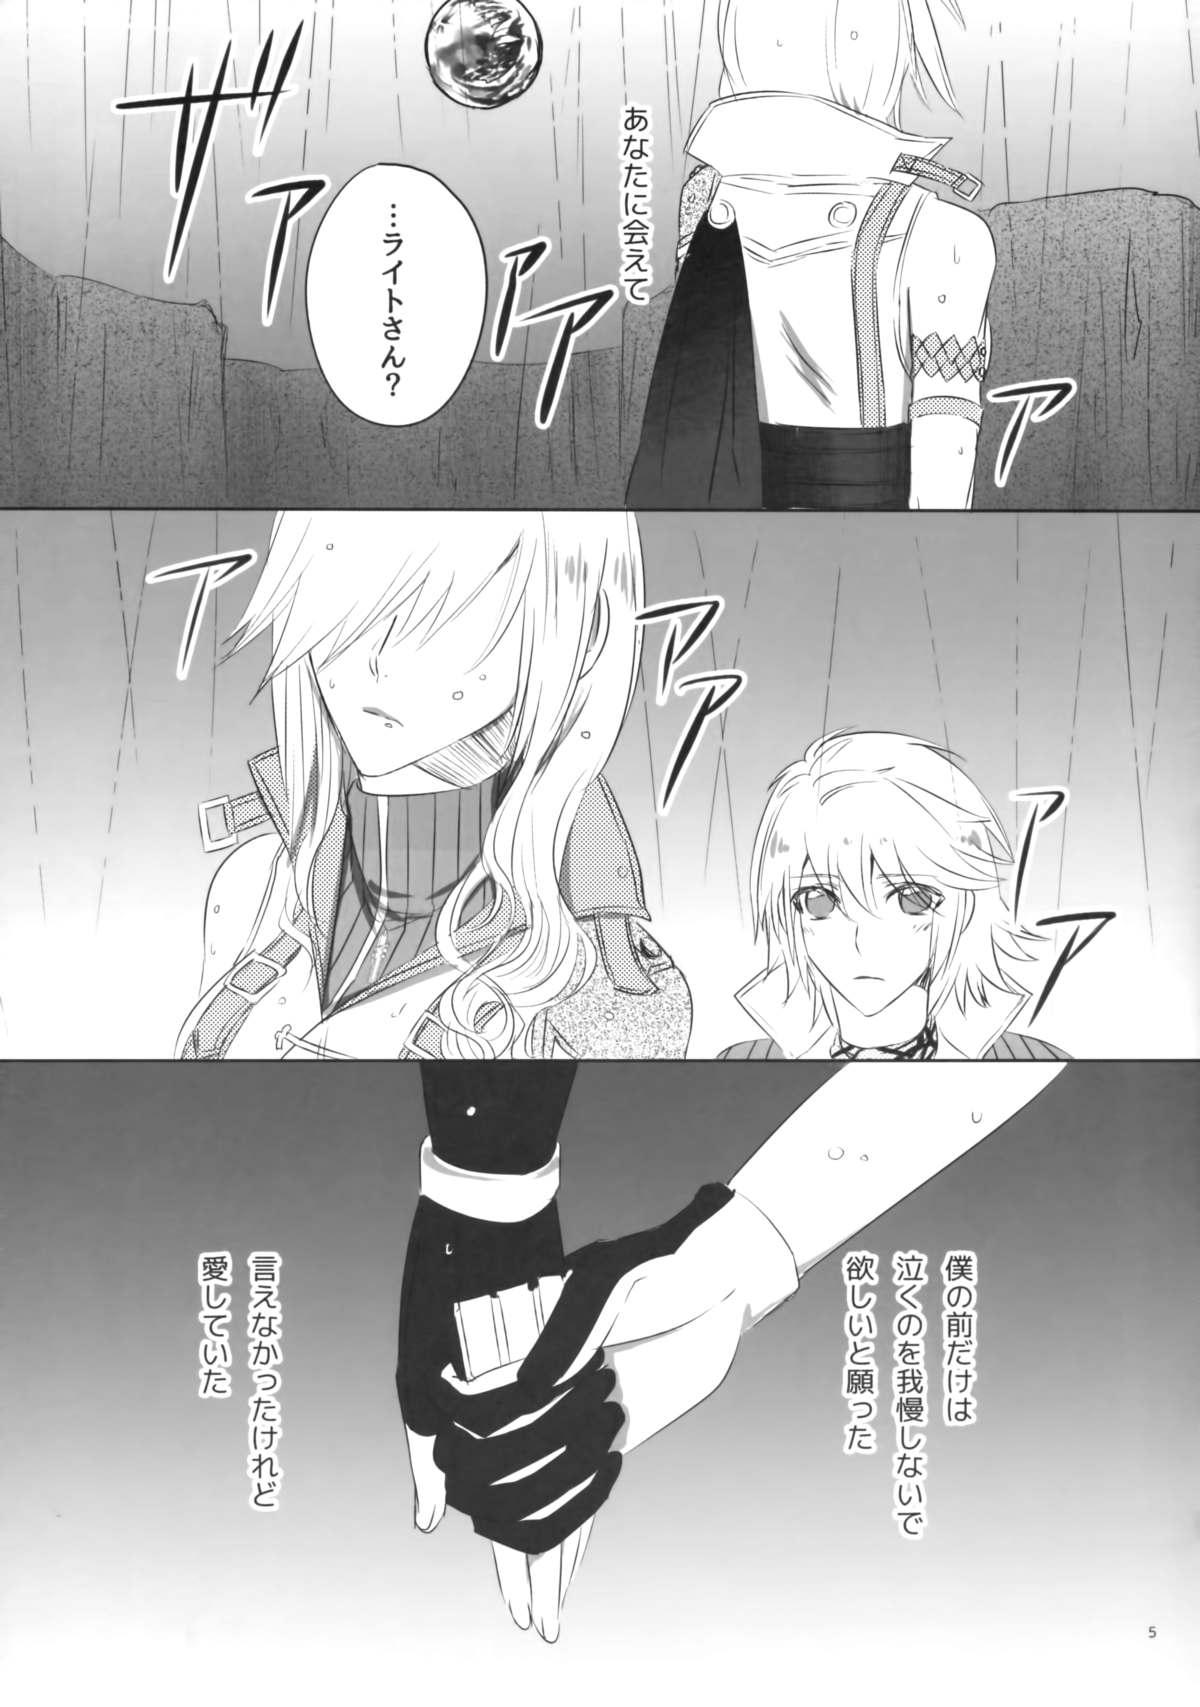 Full TO MEET YOU - Final fantasy xiii Fingering - Page 5